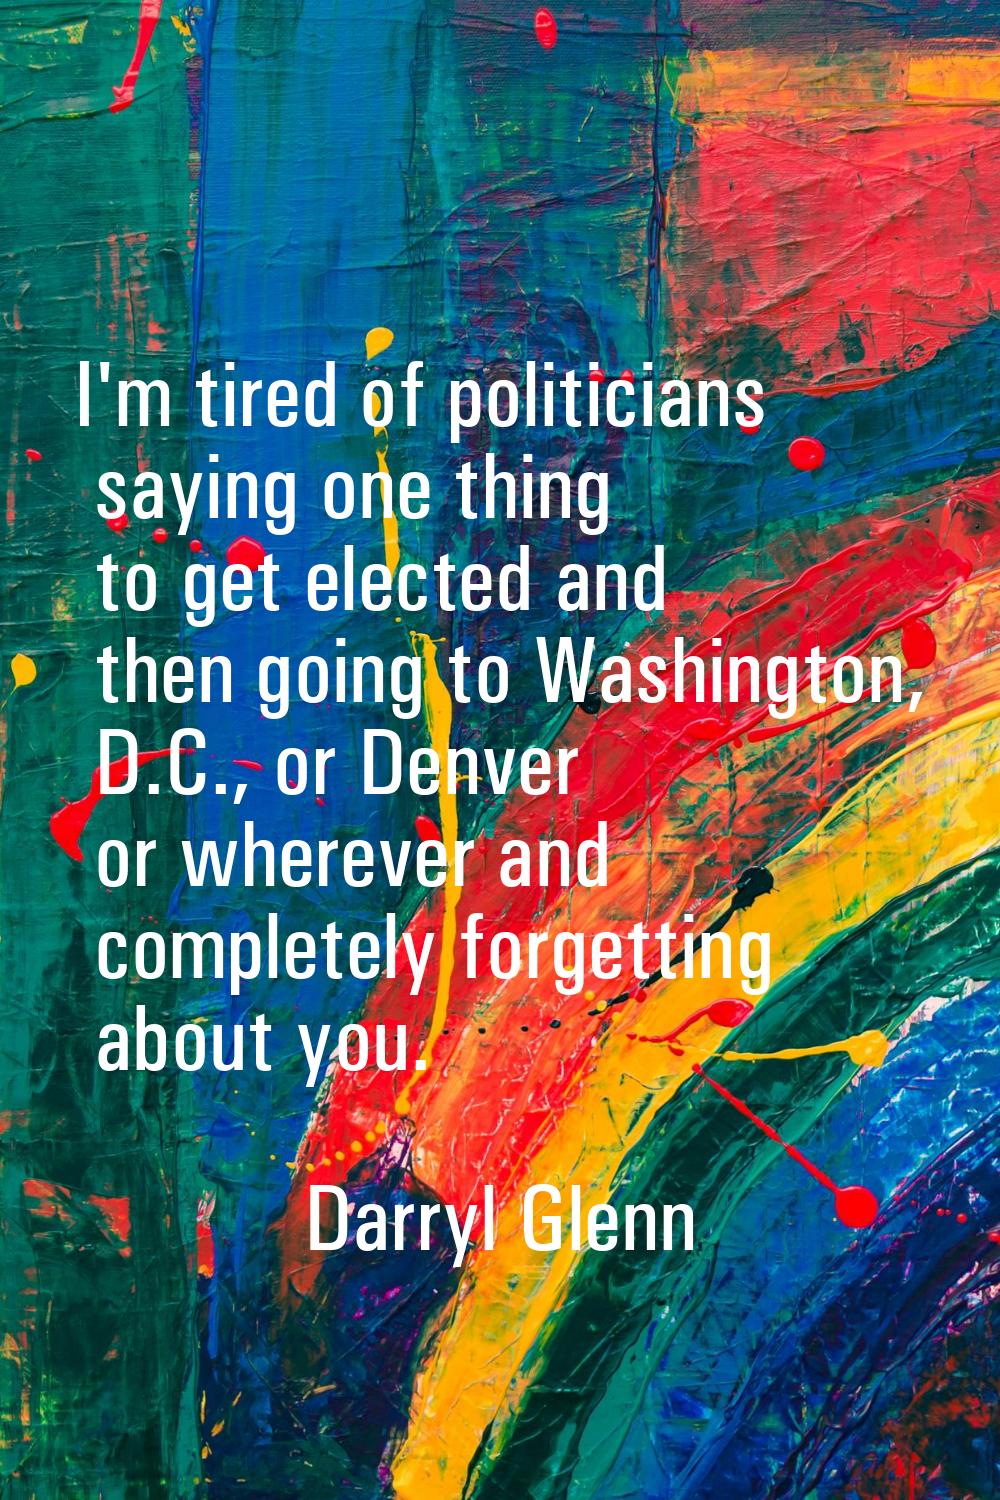 I'm tired of politicians saying one thing to get elected and then going to Washington, D.C., or Den